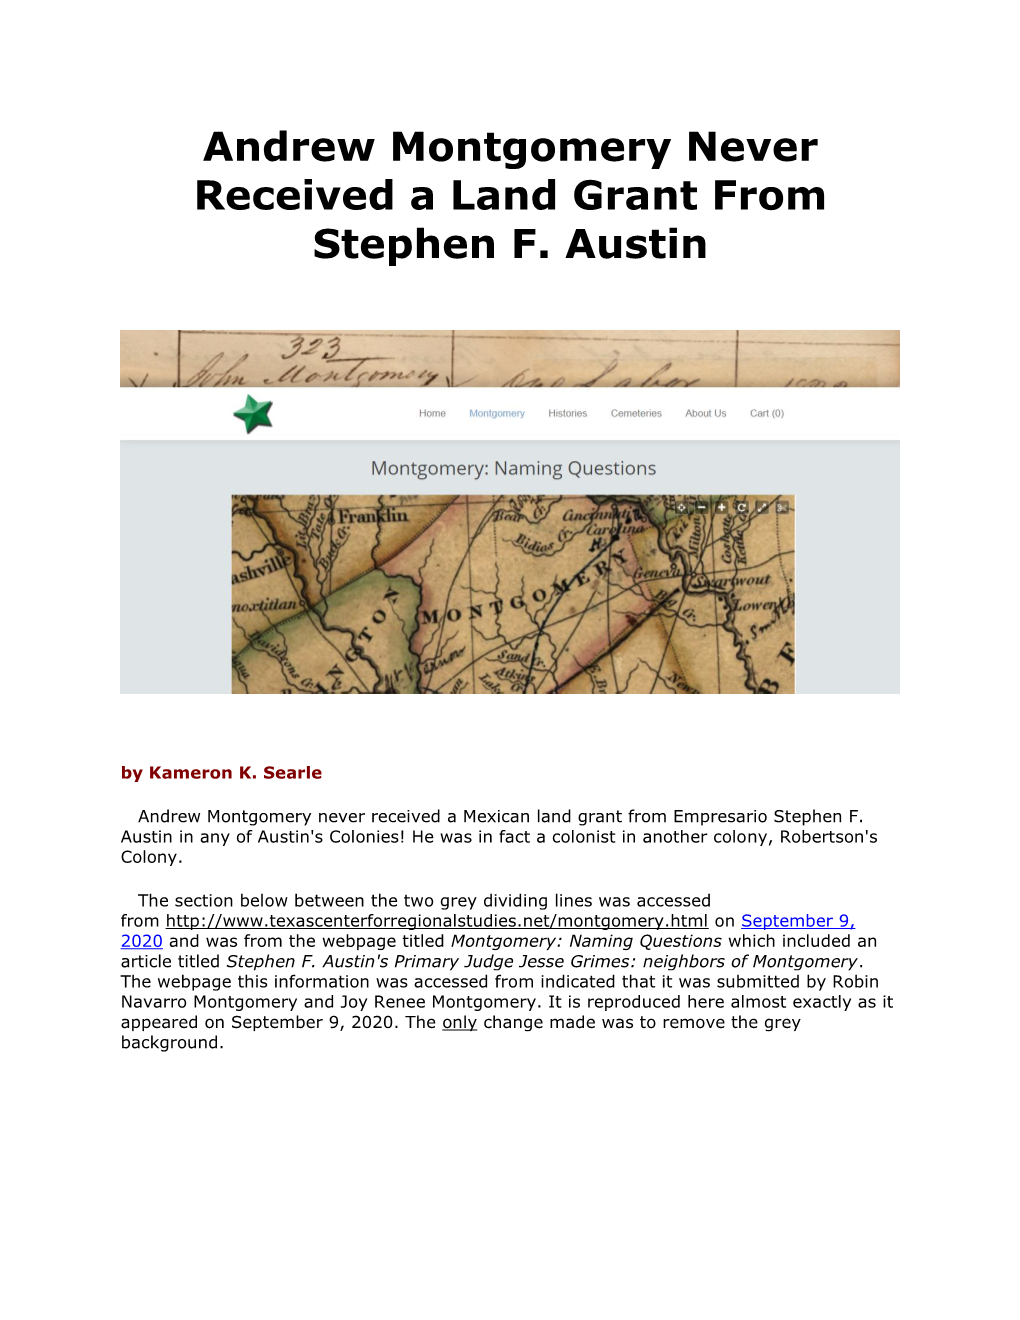 Andrew Montgomery Never Received a Land Grant from Stephen F. Austin